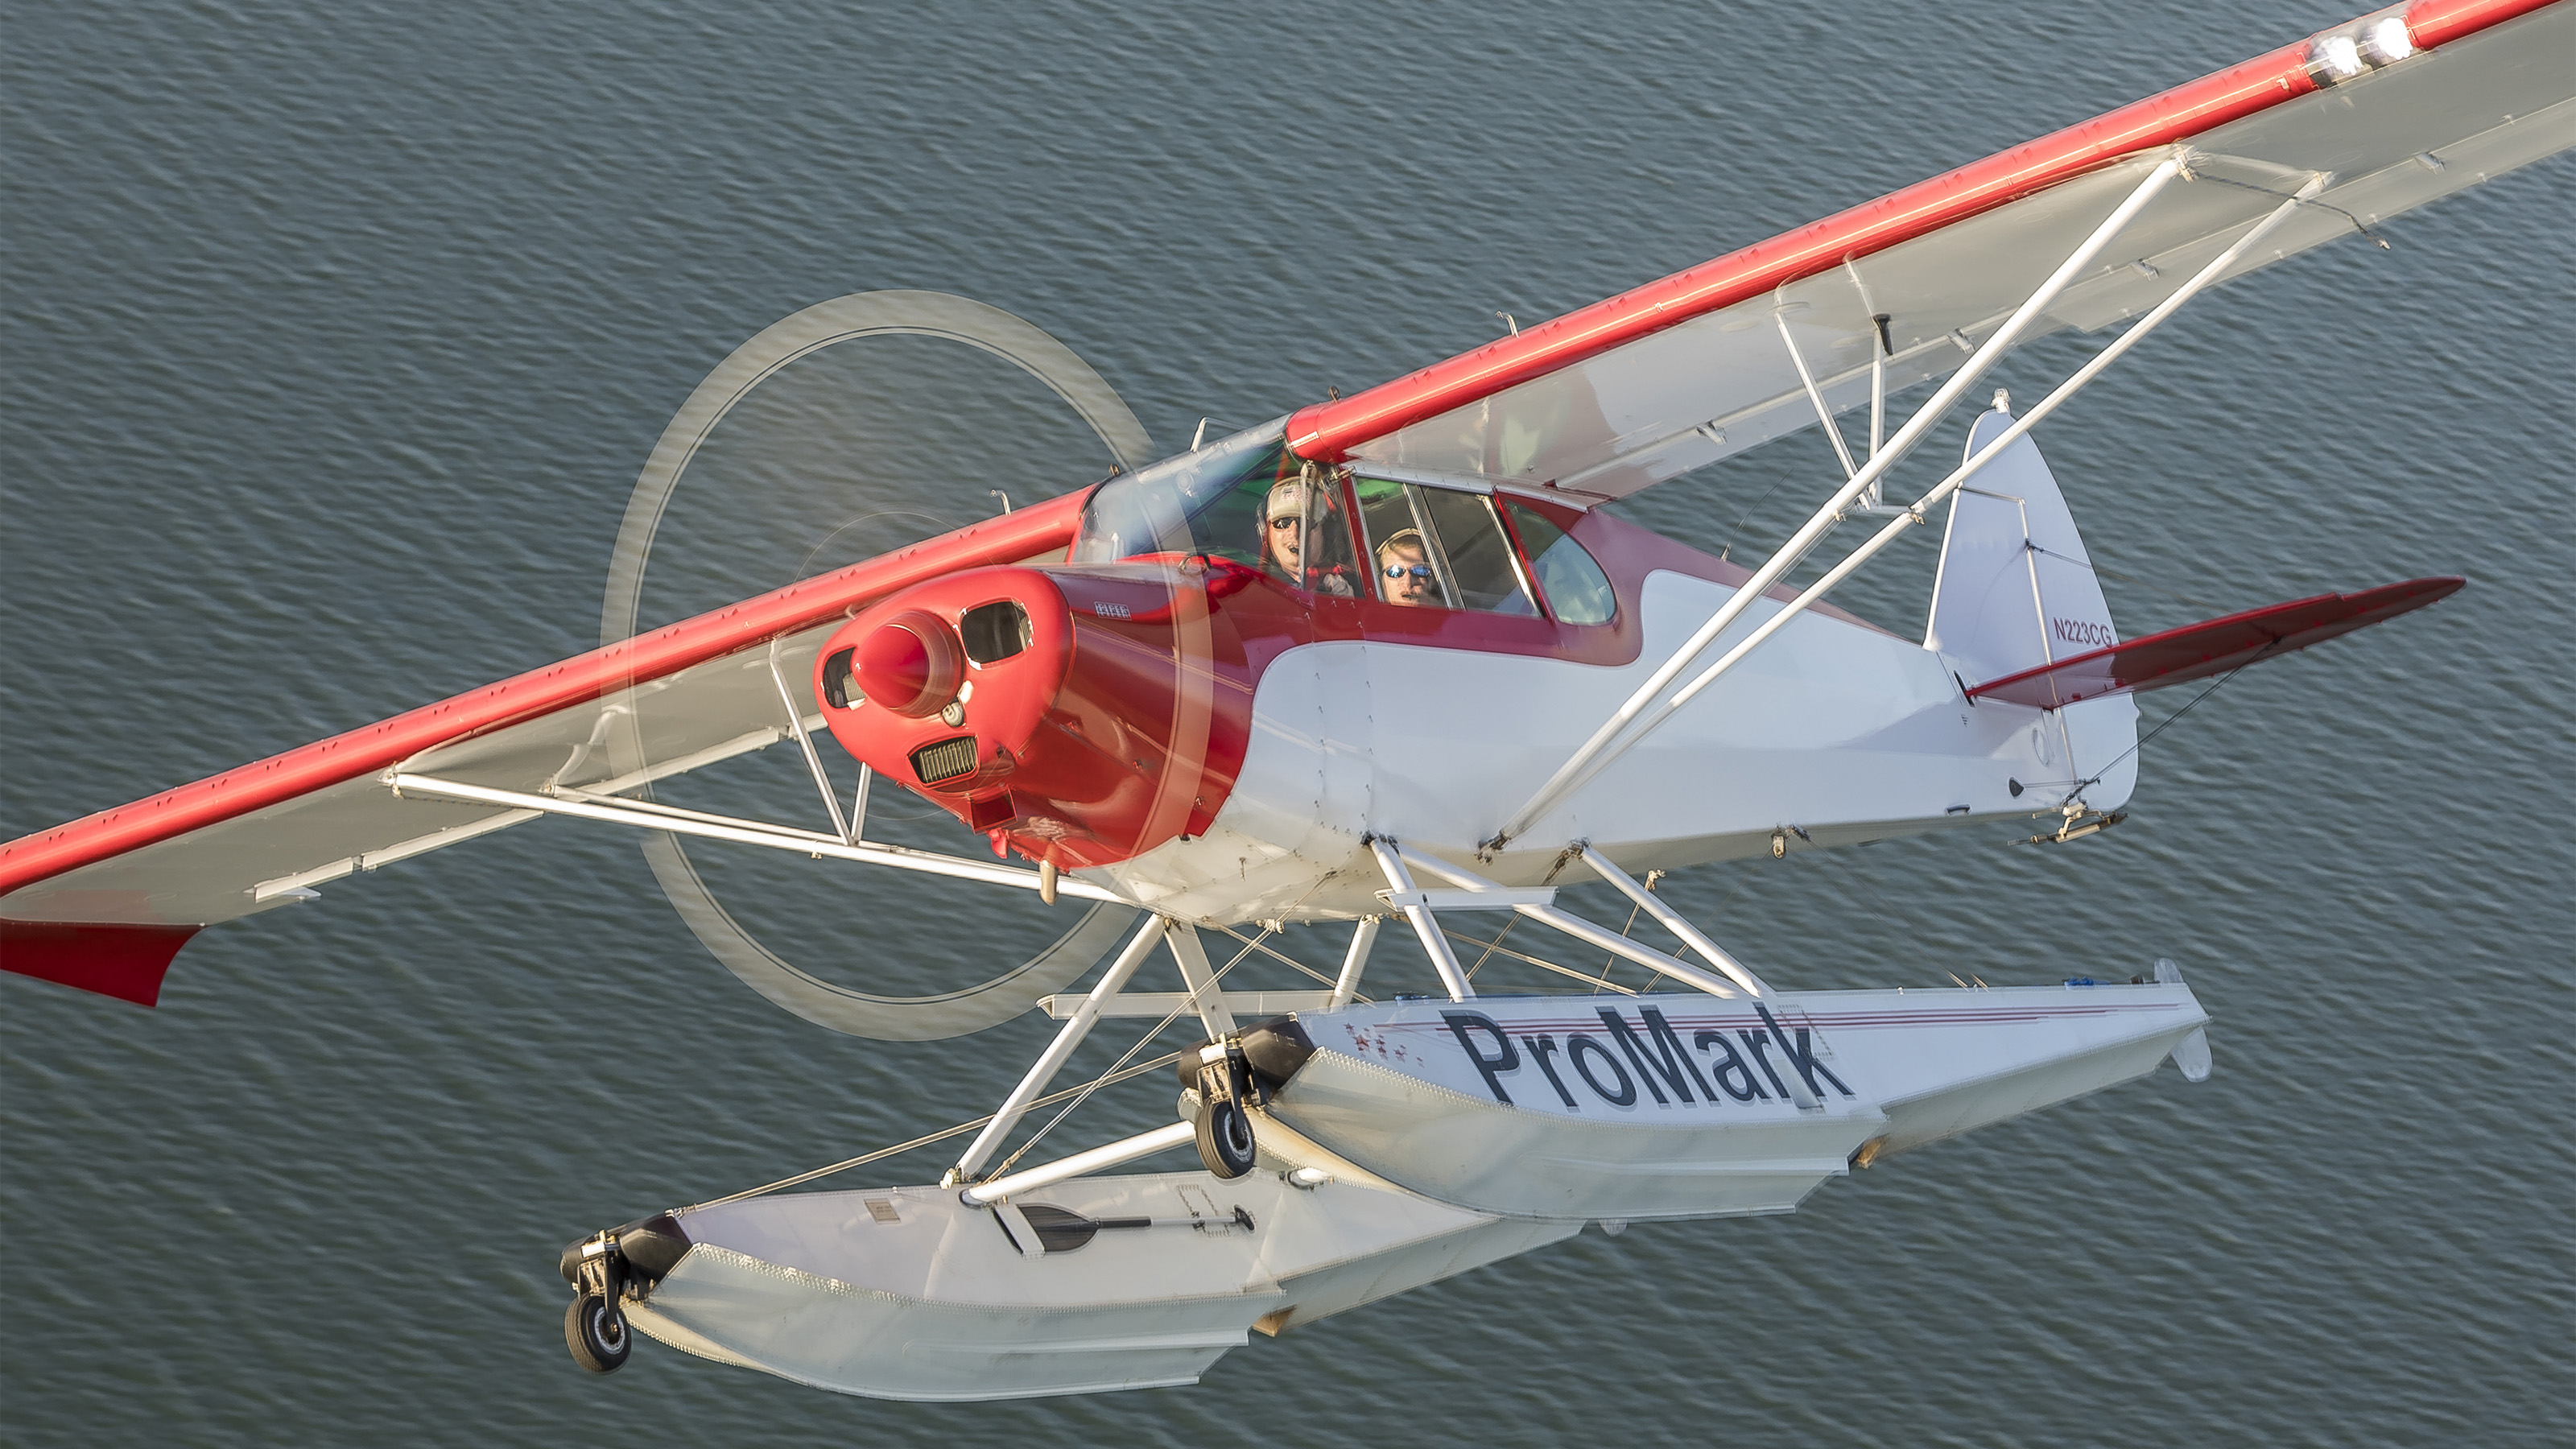 ProMark Aviation Services based at Burnet Municipal Kate Craddock Field offers flight training including seaplane training in a Piper PA-12 Super Cruiser and off-airport backcountry flying in a Piper PA-18 Super Cub. Photo by Jack Fleetwood.